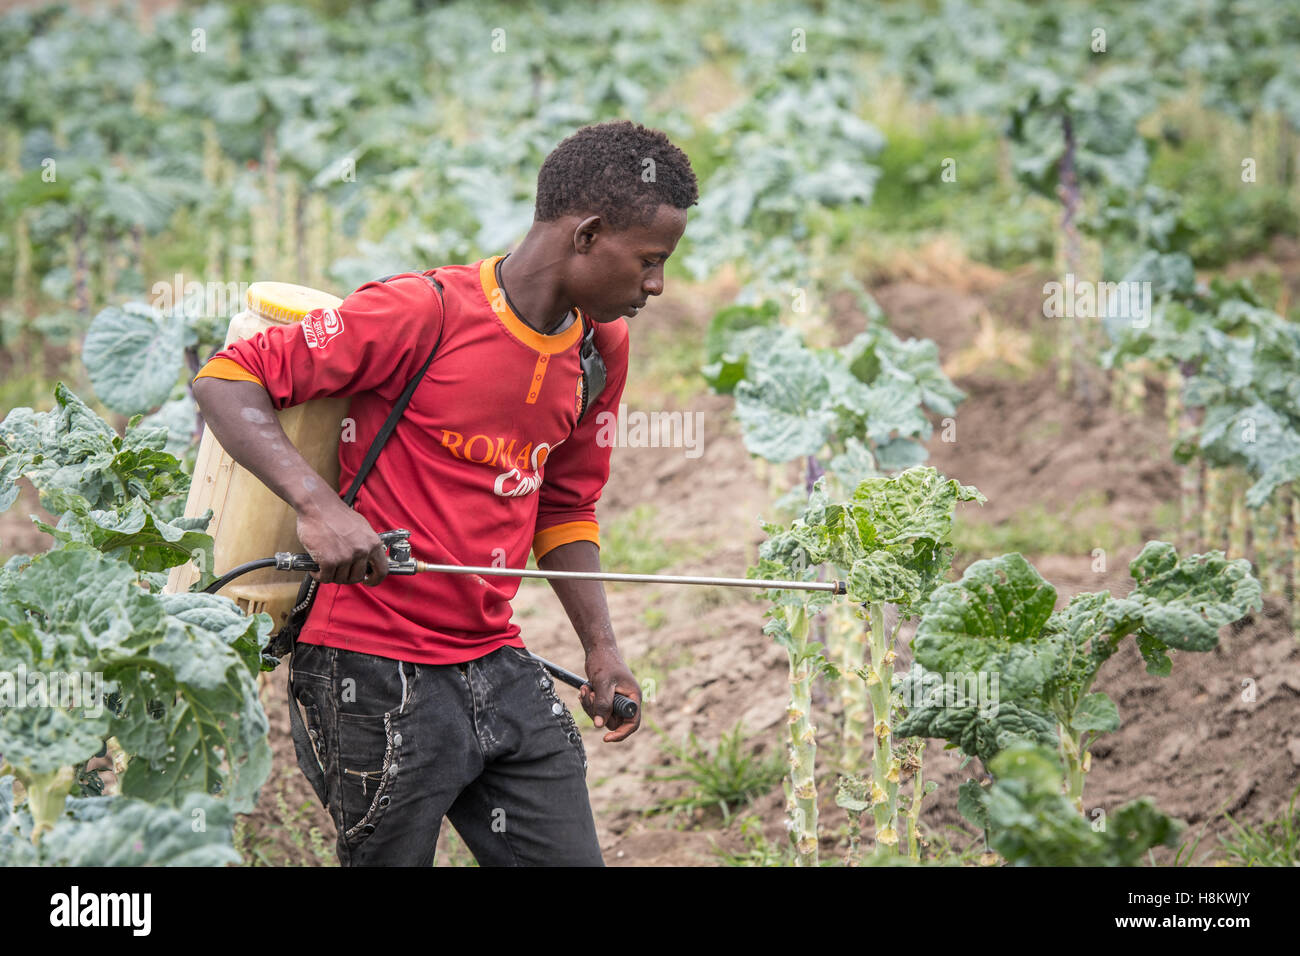 Meki Batu, Ethiopia - Young male worker spraying pesticides on kale plants at the Fruit and Vegetable Growers Cooperative in Mek Stock Photo